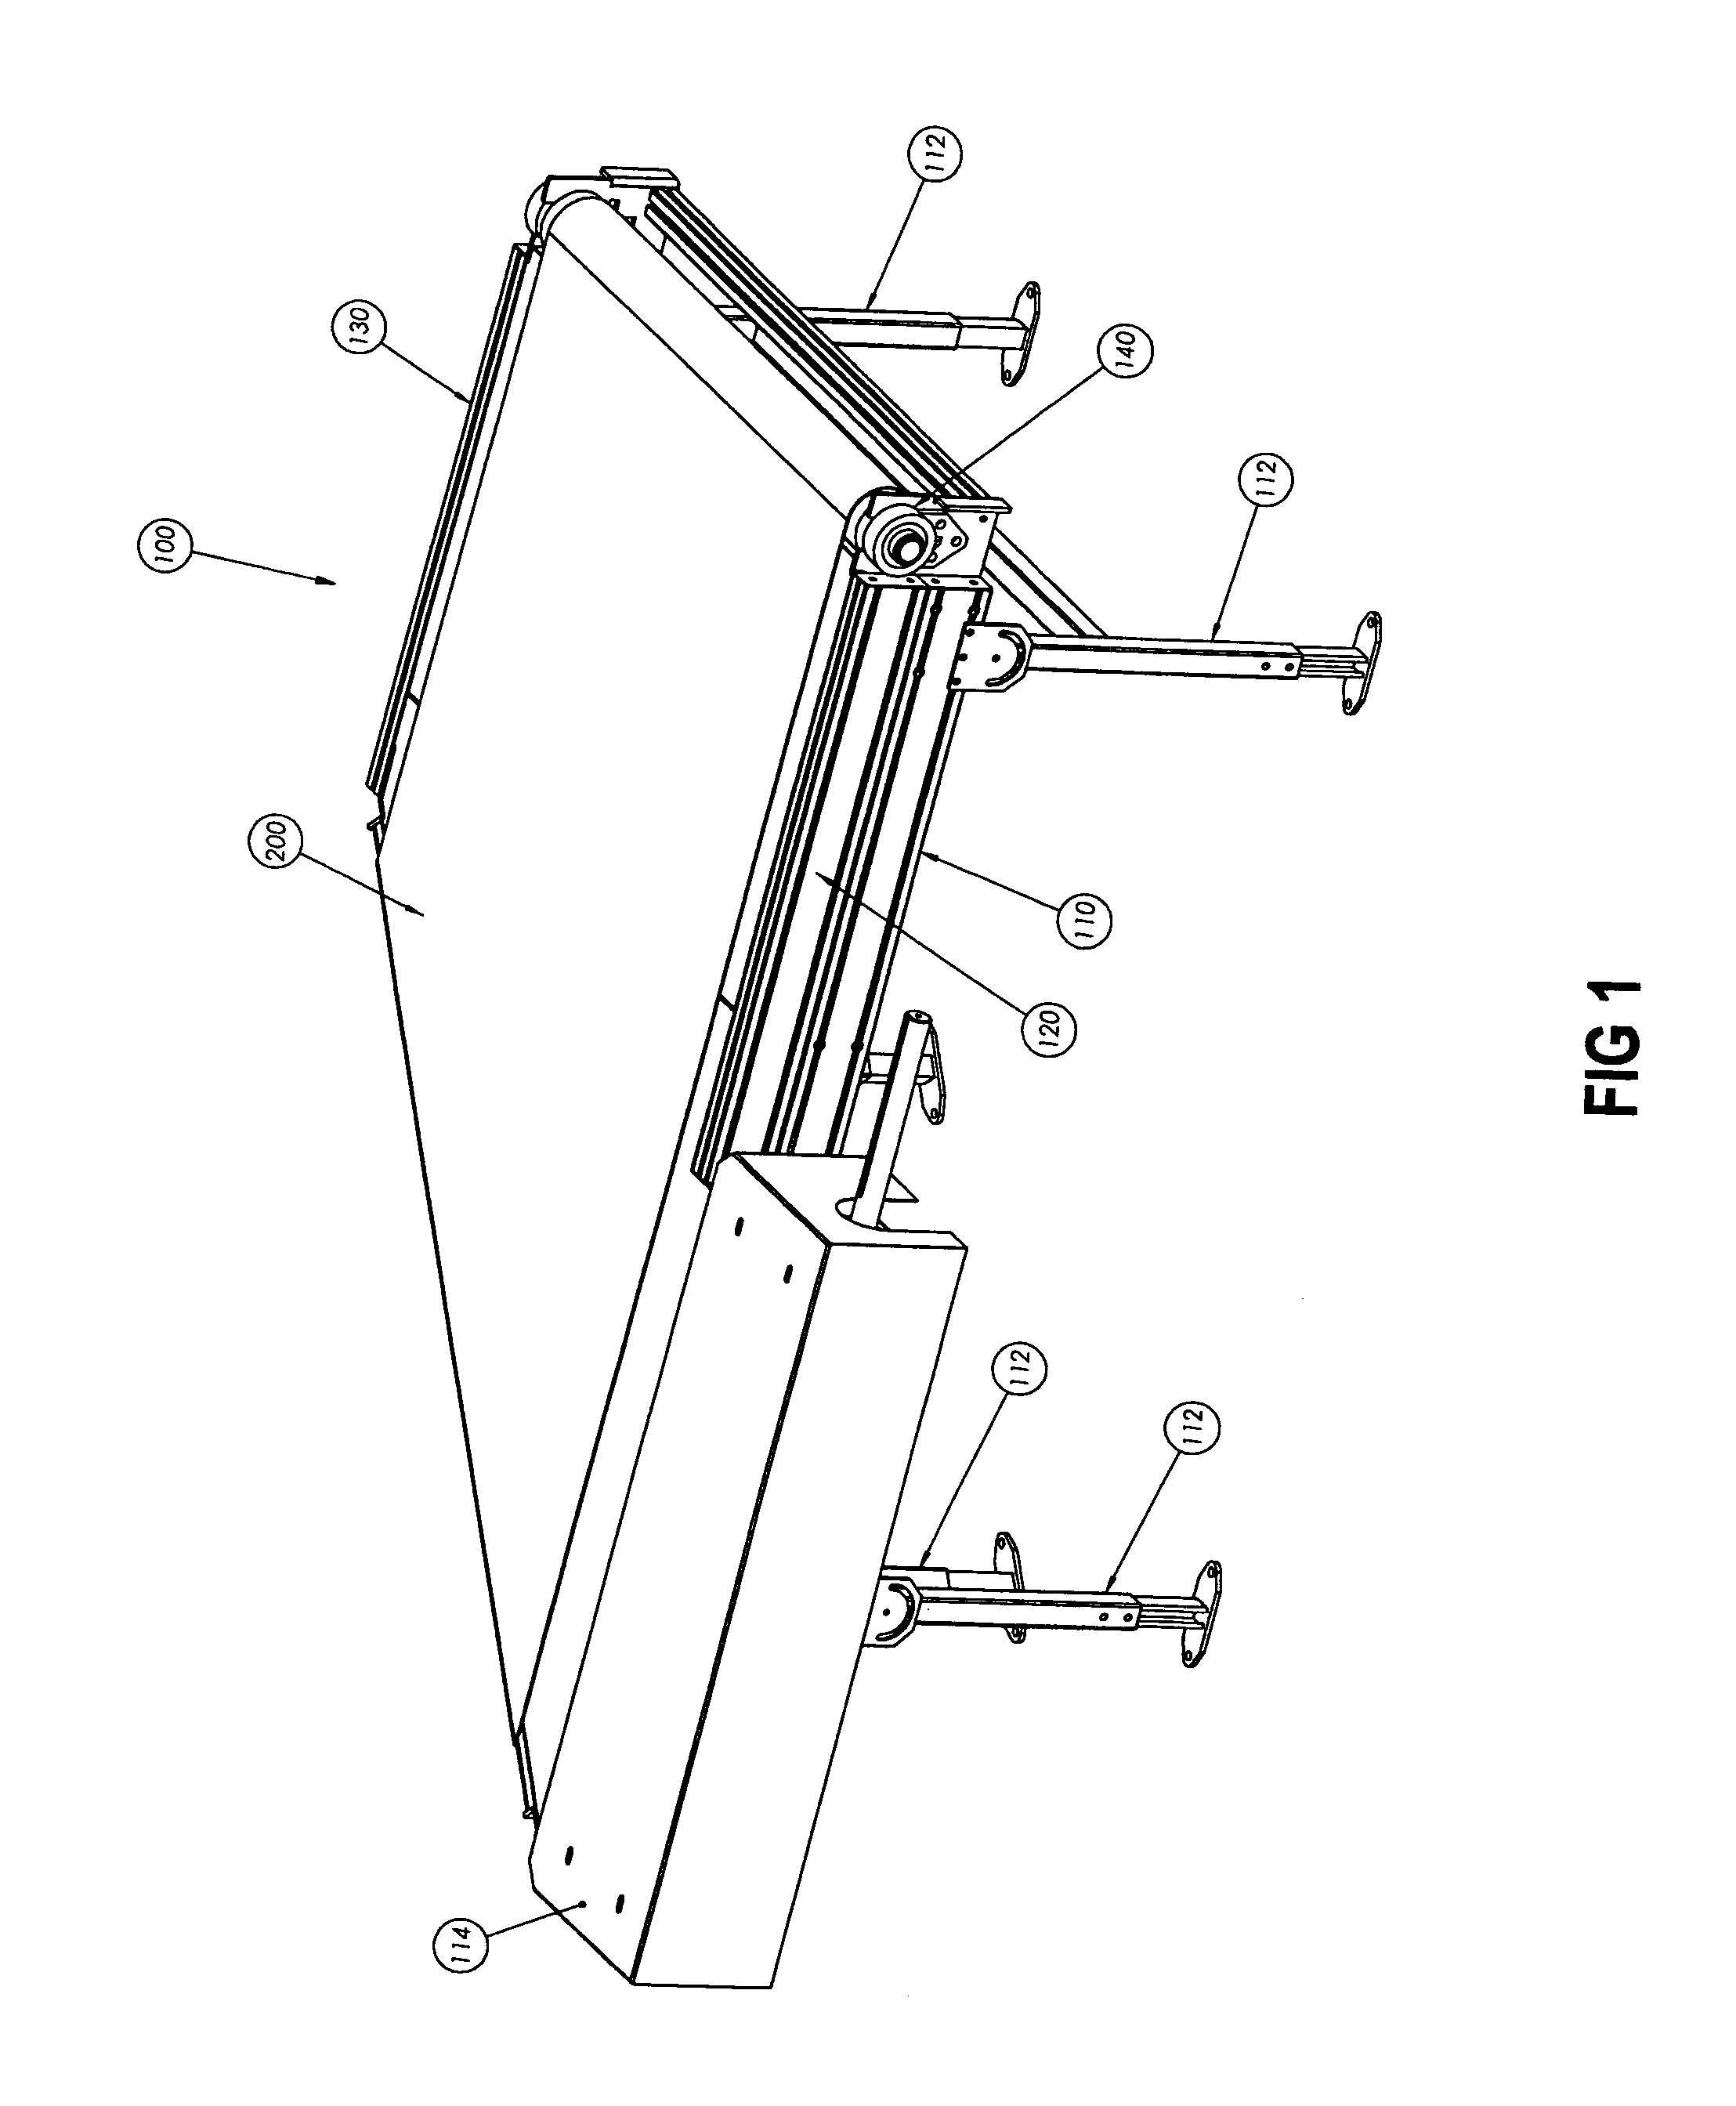 Merge/diverge conveying apparatus and method of providing a conveyor belt for a merge/diverge apparatus